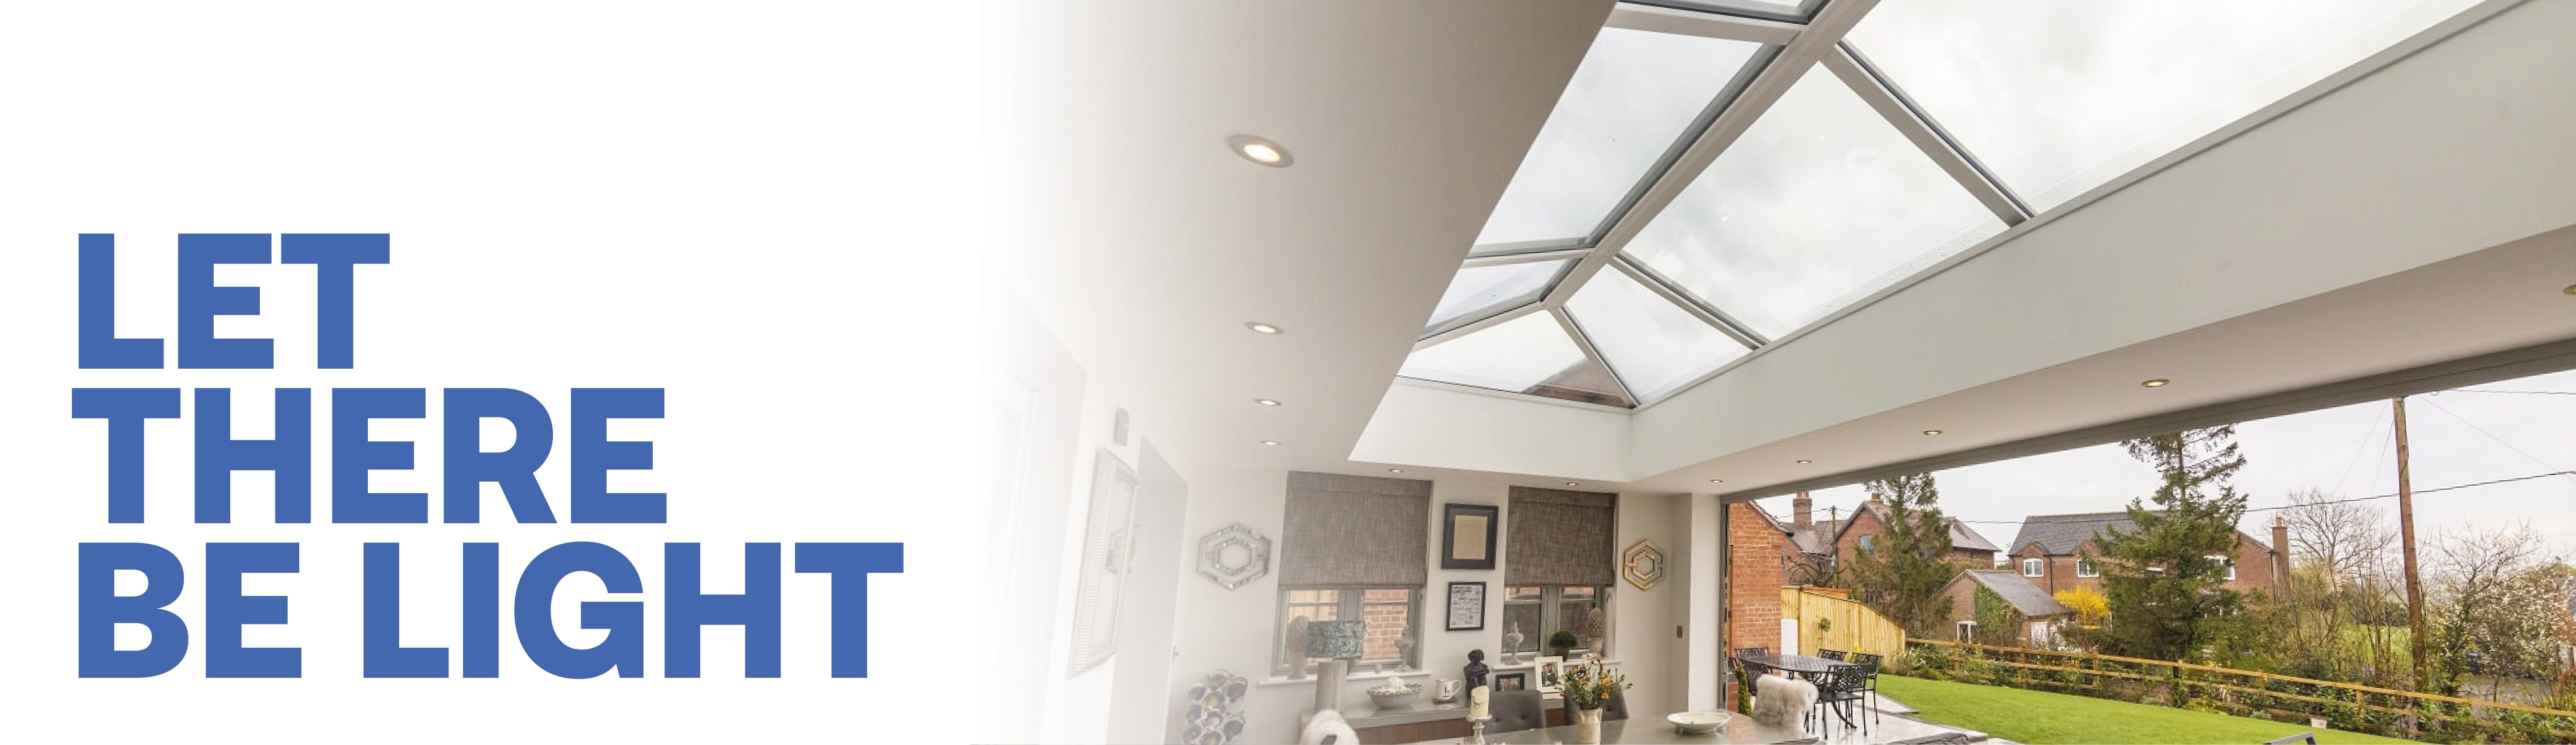 Let the light in with a roof lantern